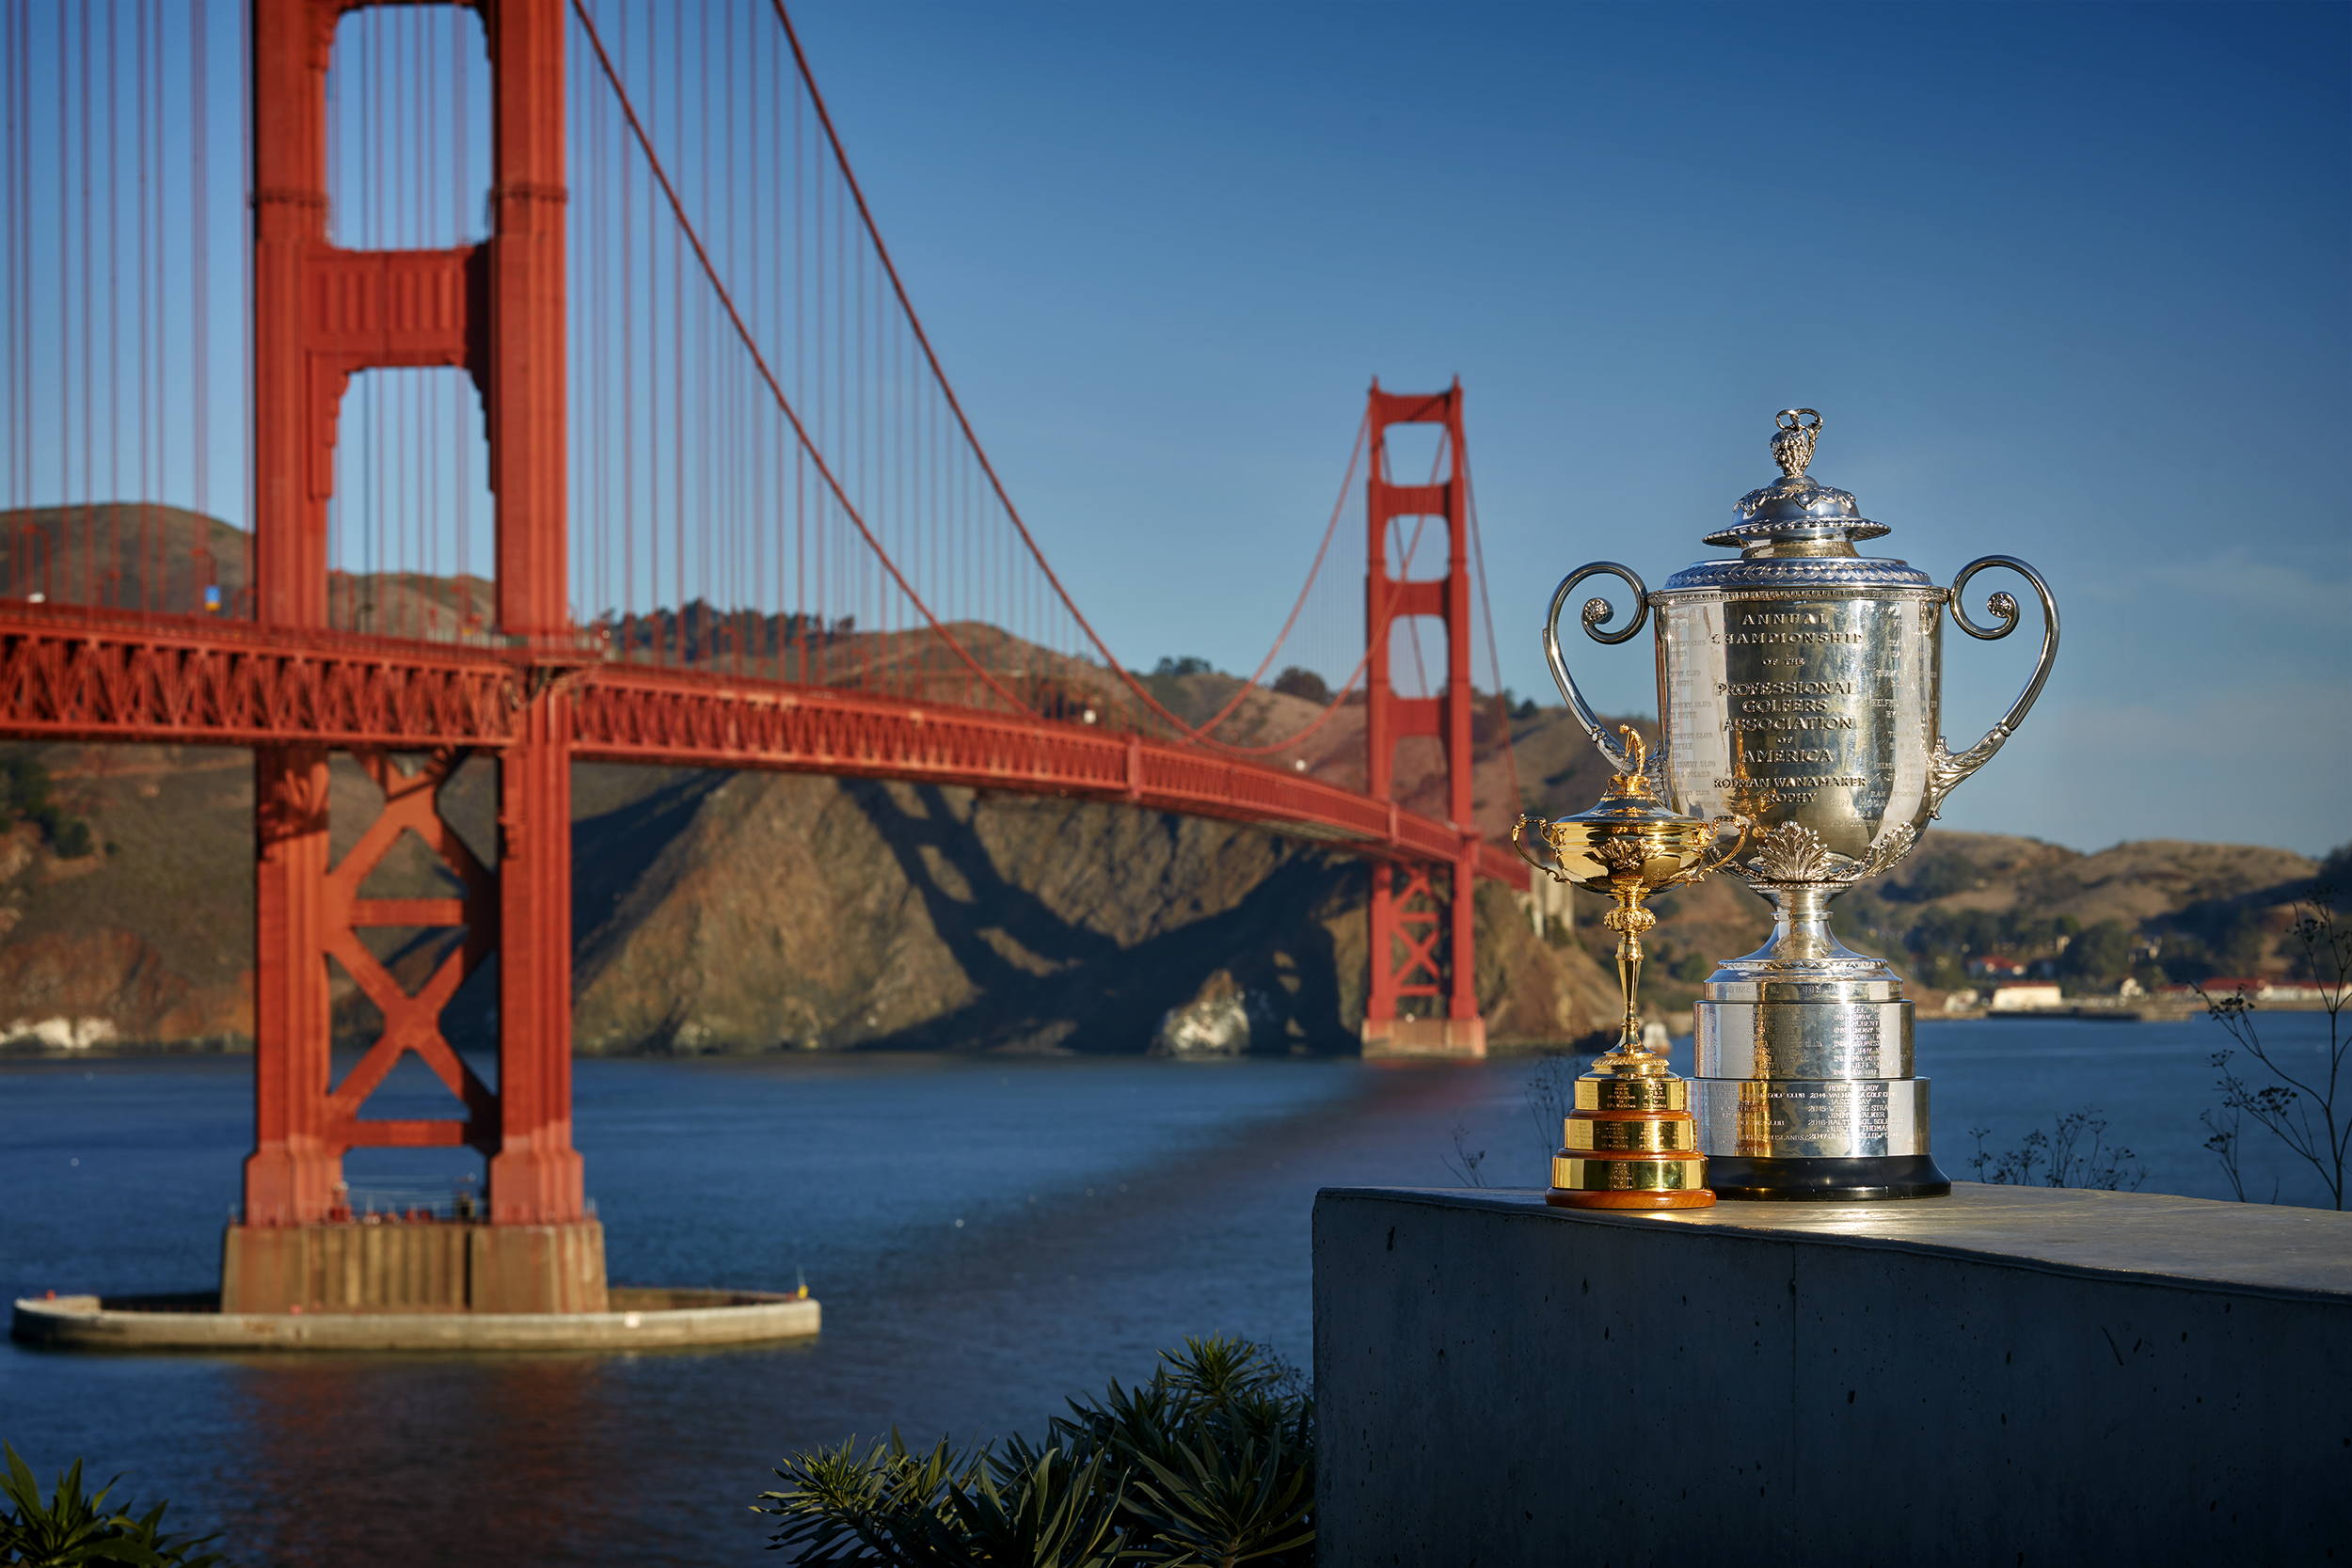 PGA of America to host 2028 PGA Championship, 2032 Ryder Cup at The Olympic Club